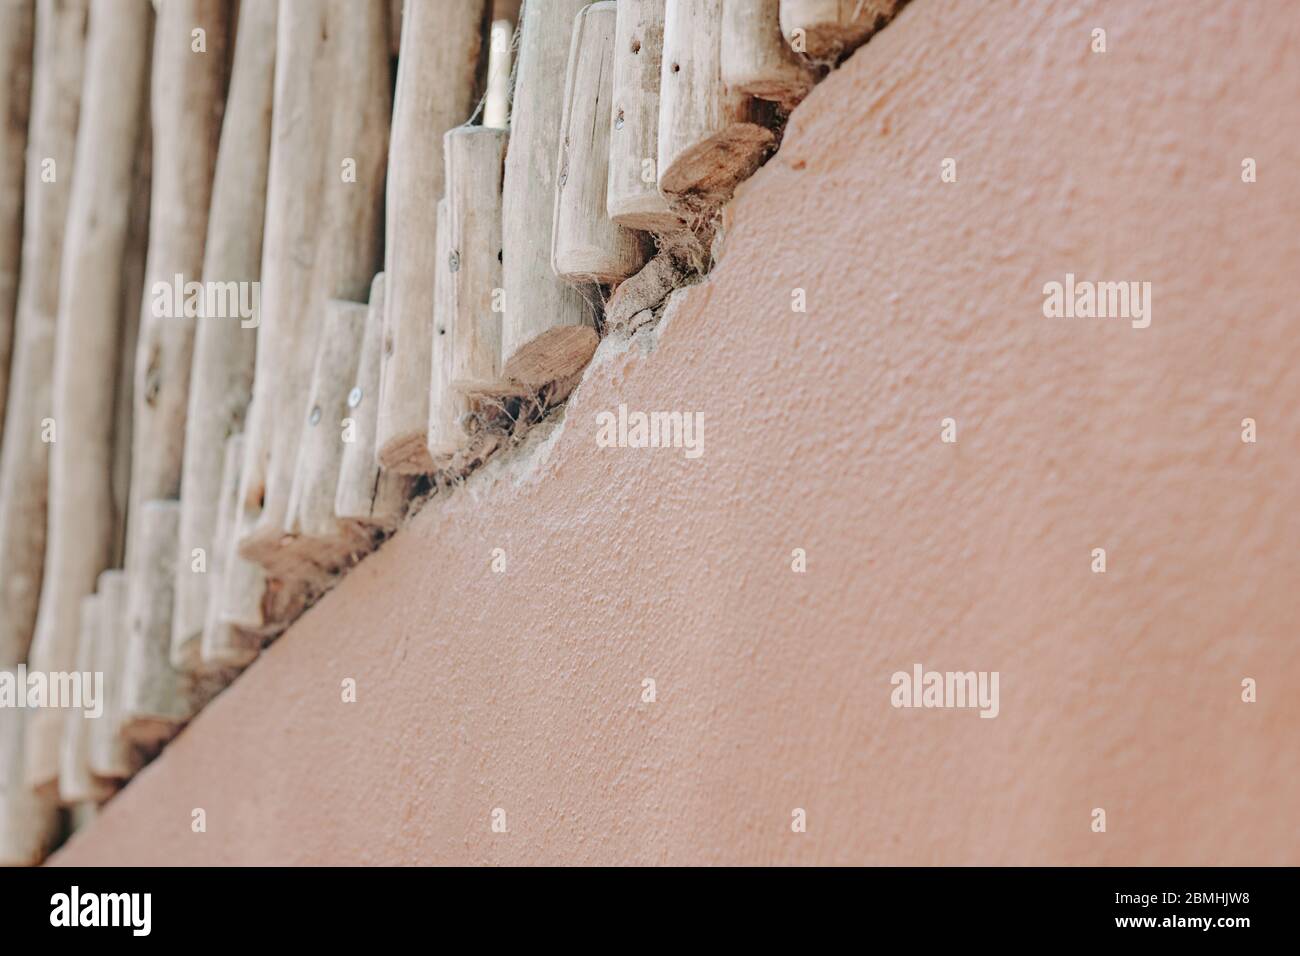 Nature background, terracotta wall, wood fence, sticks, neutral, plain, peach wall, minimal background, abstract, brown, browns, blog image Stock Photo